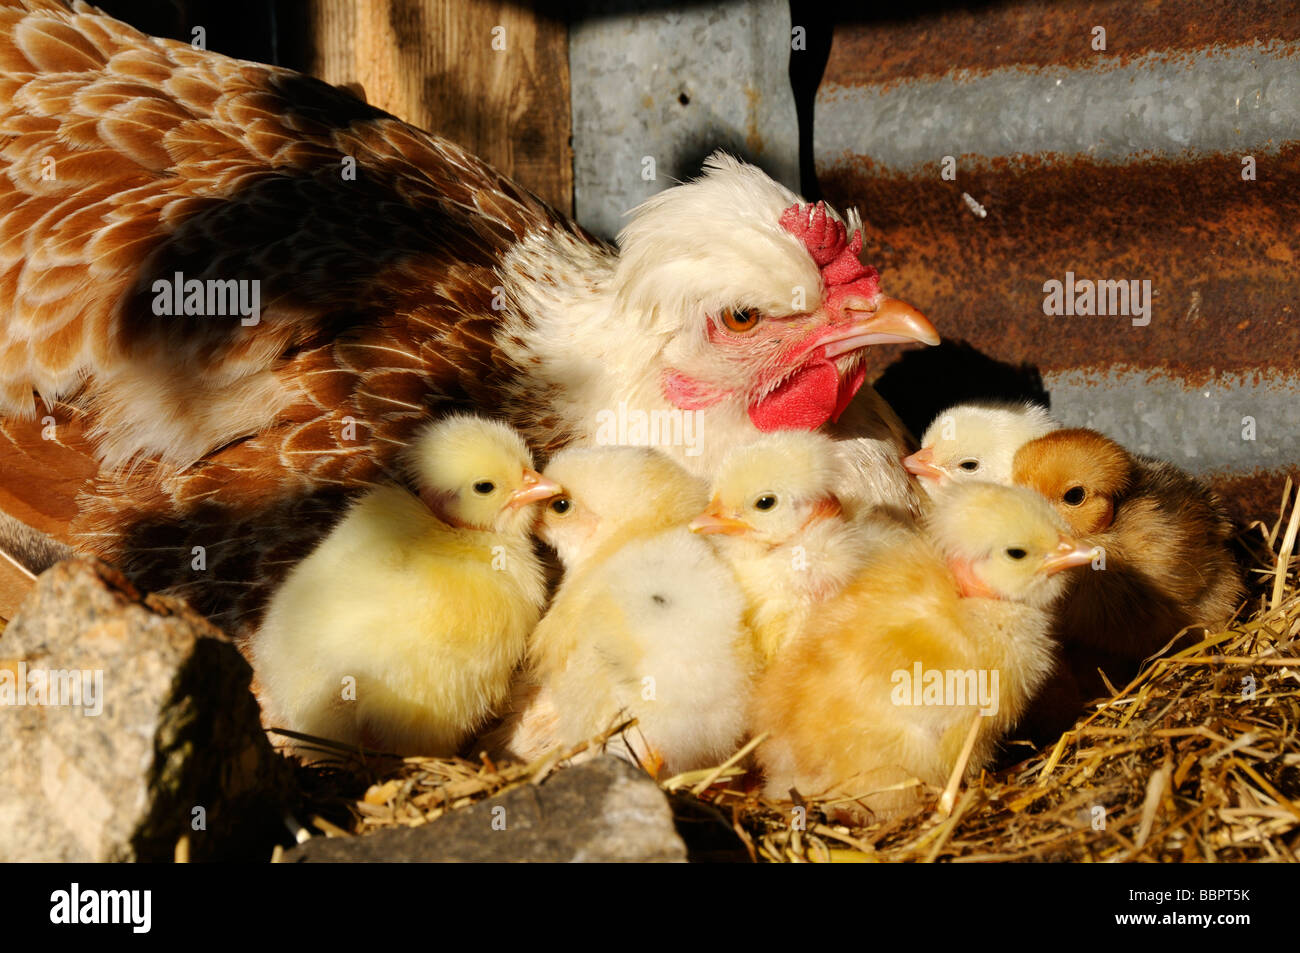 Stock photo of a mother Hen with her newborn chicks Stock Photo